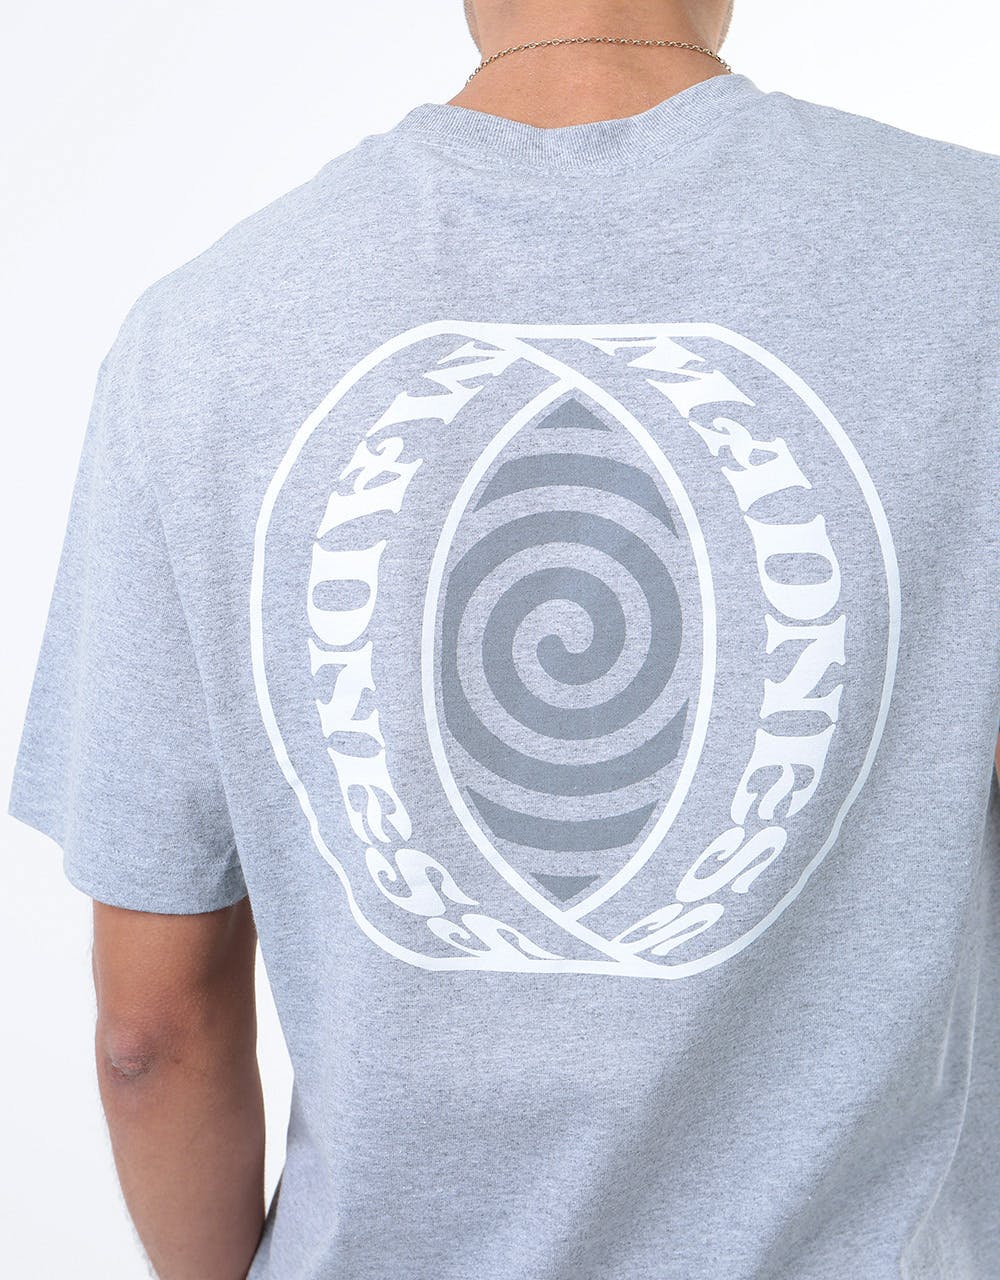 Madness Ring T-Shirt - Heather Grey